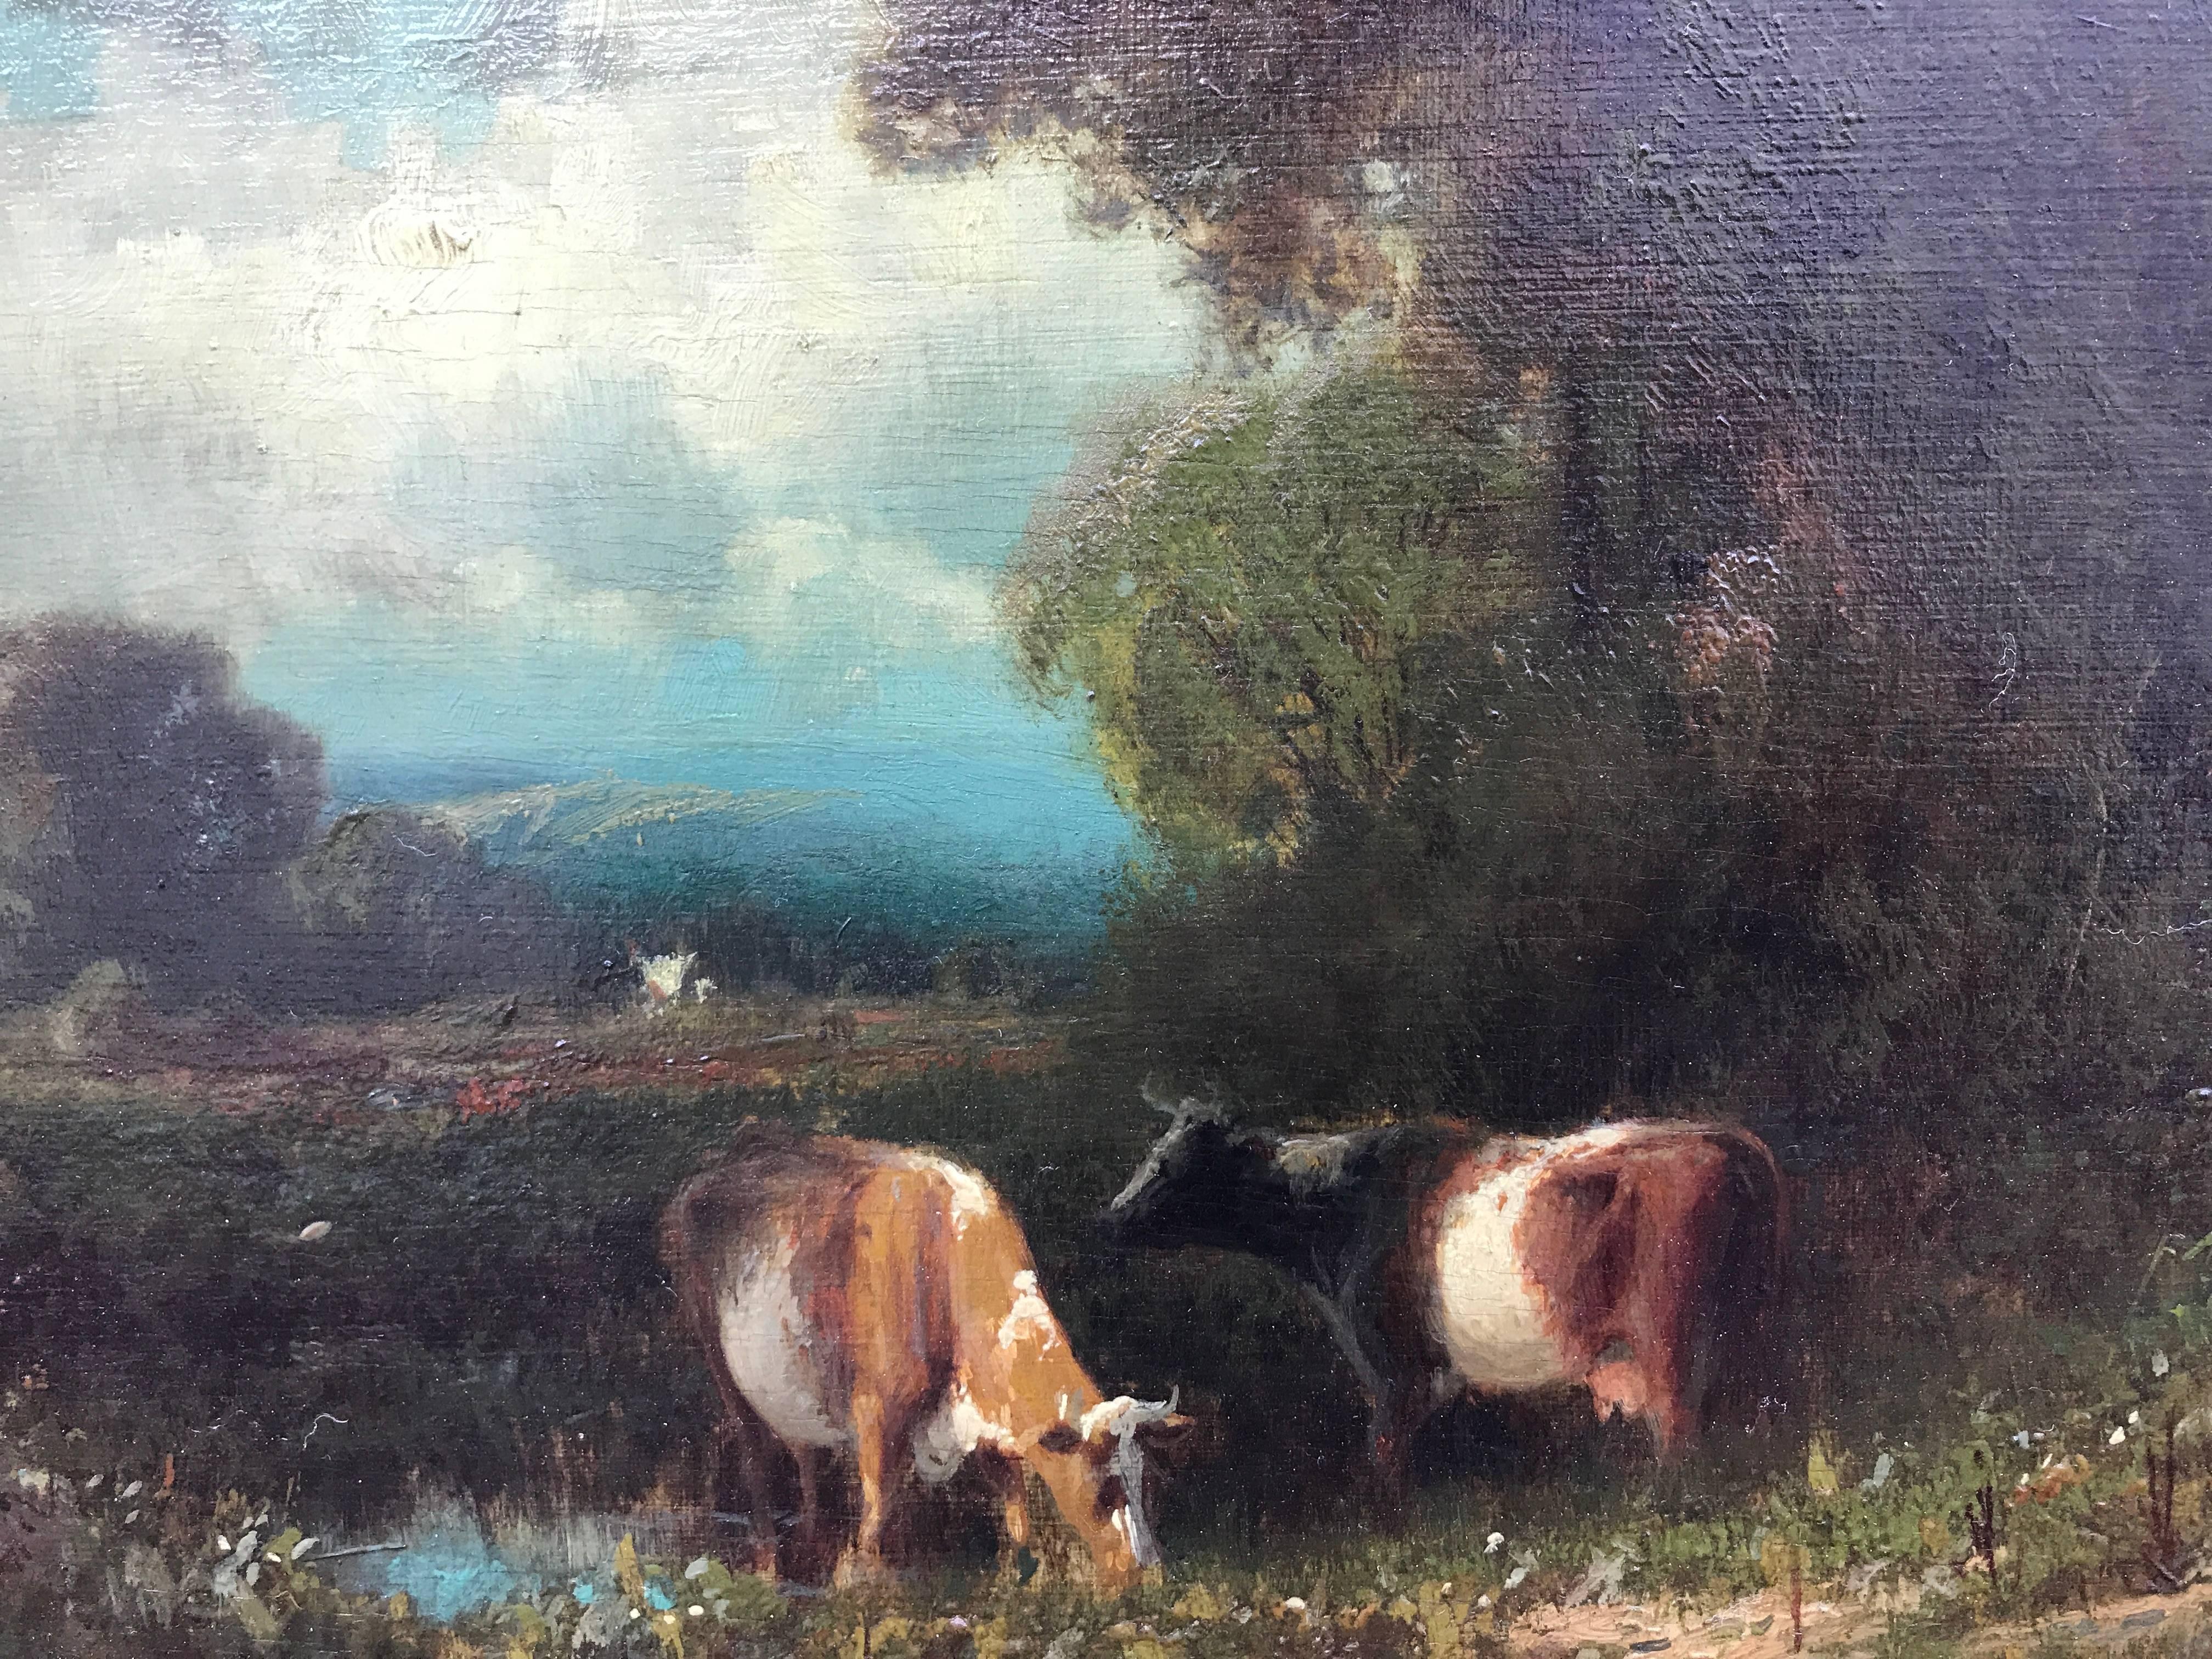 "Cows in a Landscape"